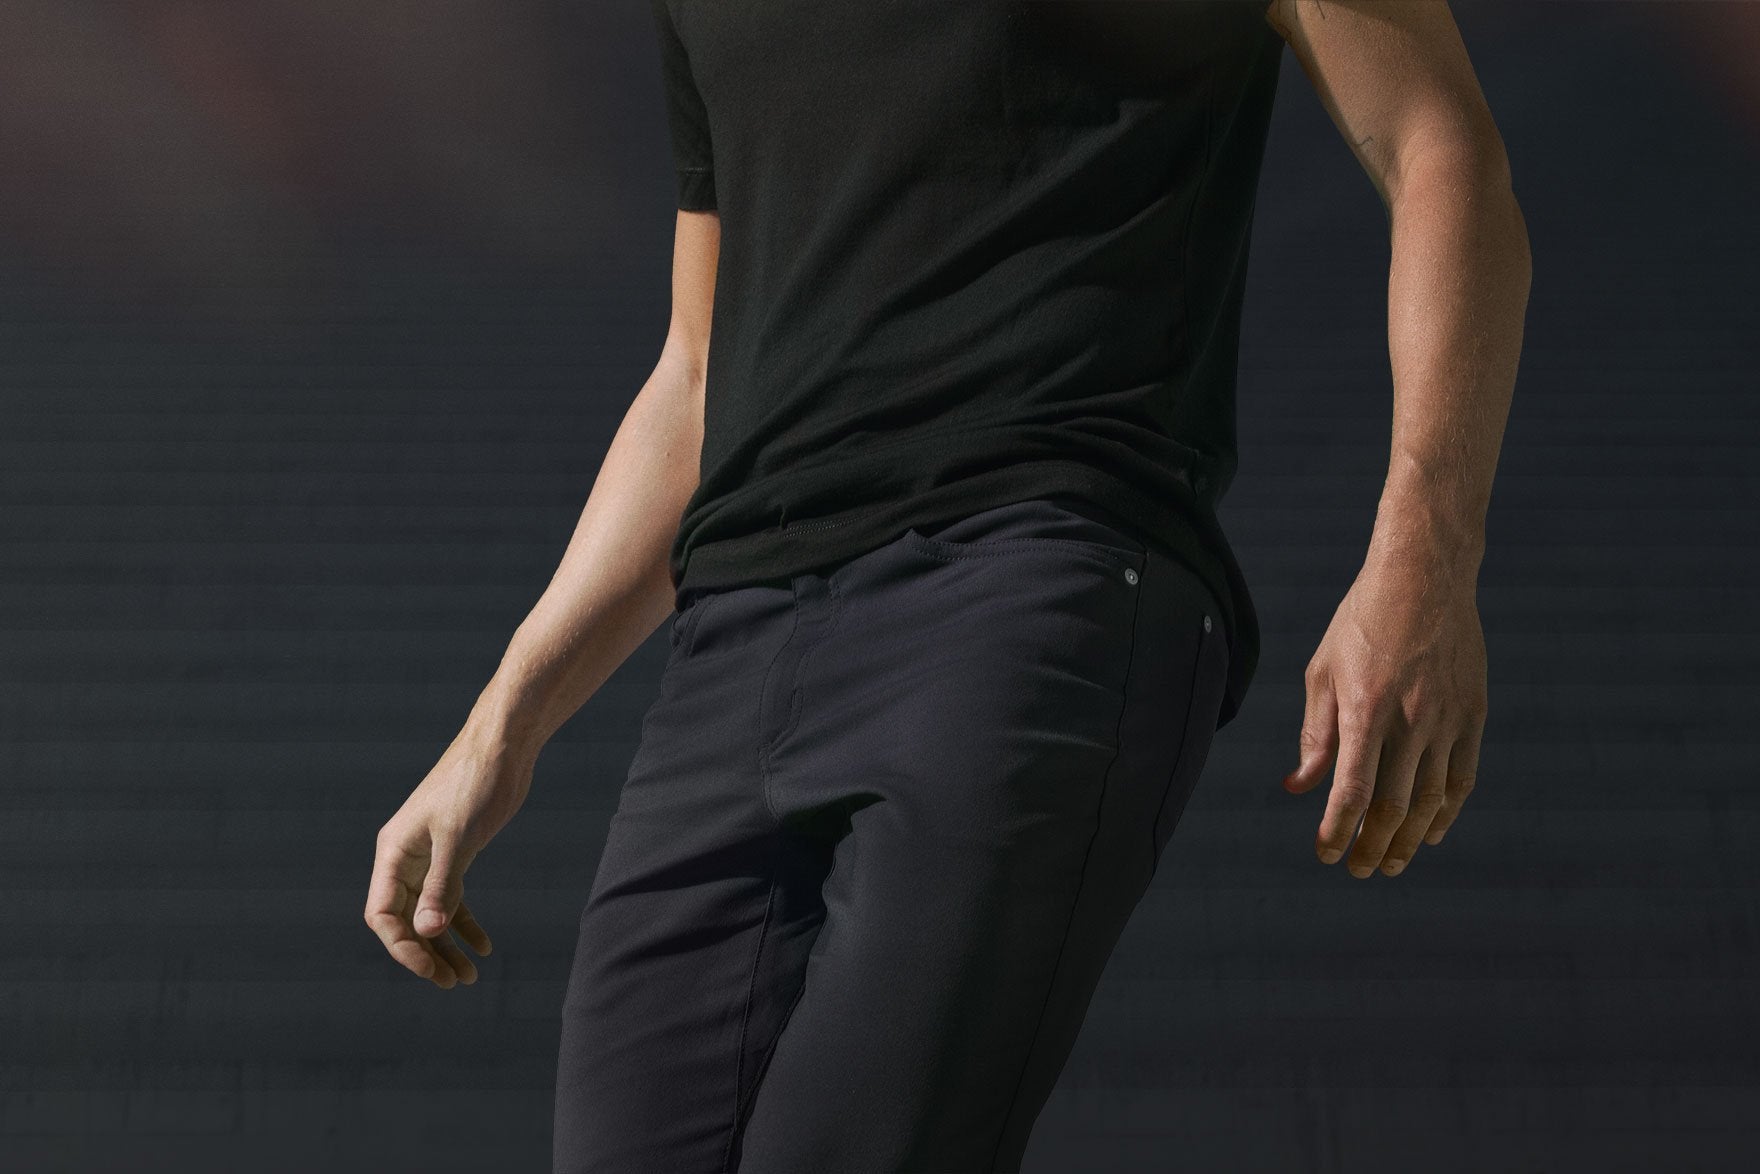 John Paul, chest to thighs, arms raised slightly at sides, wearing Slim Dungarees in Charcoal and our Ultrafine Merino Cut One T-Shirt in Black.